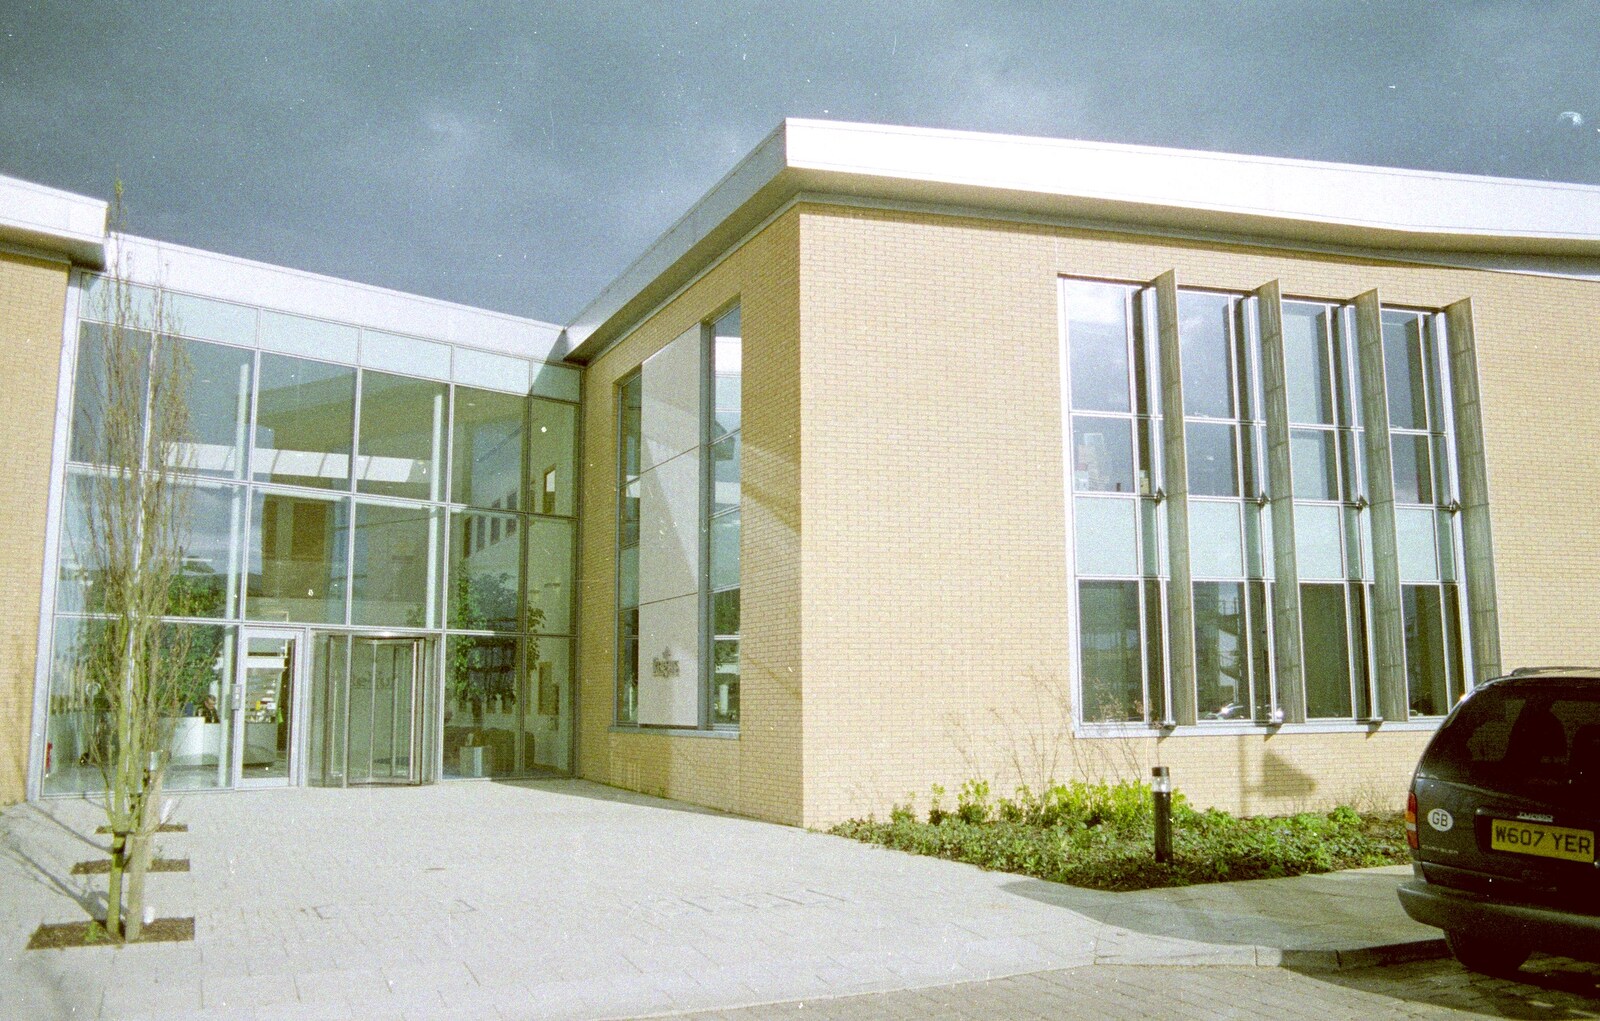 More of the Cambourne office from 3G Lab Moves Offices, Milton Road, Cambourne and Cambridge - 27th August 2001